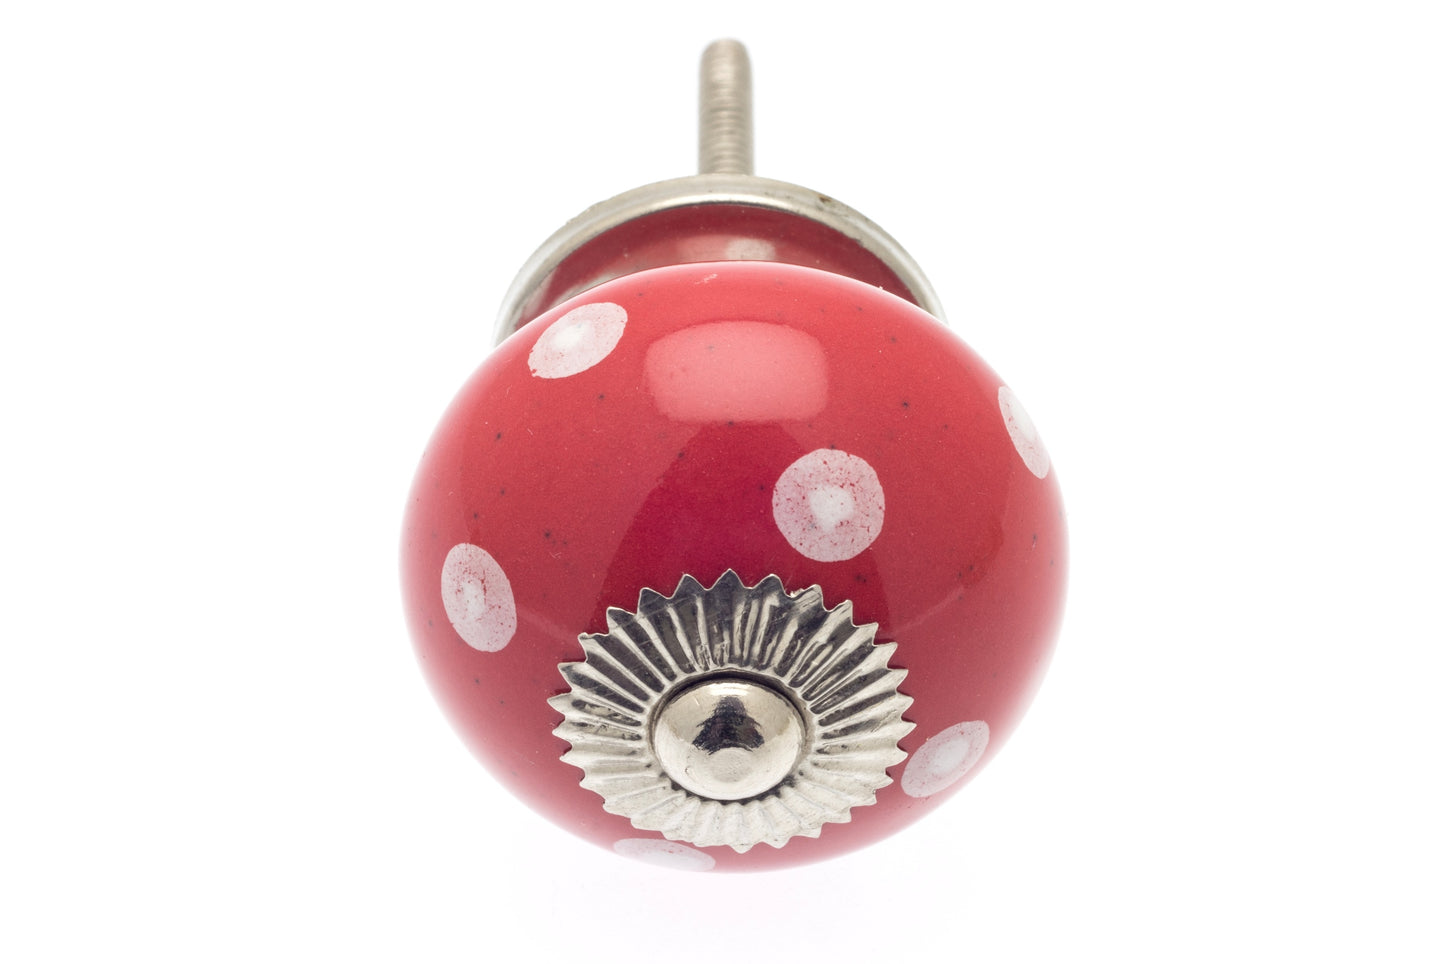 Round Ceramic Knob Red with White Spots / Polka Dots 40mm